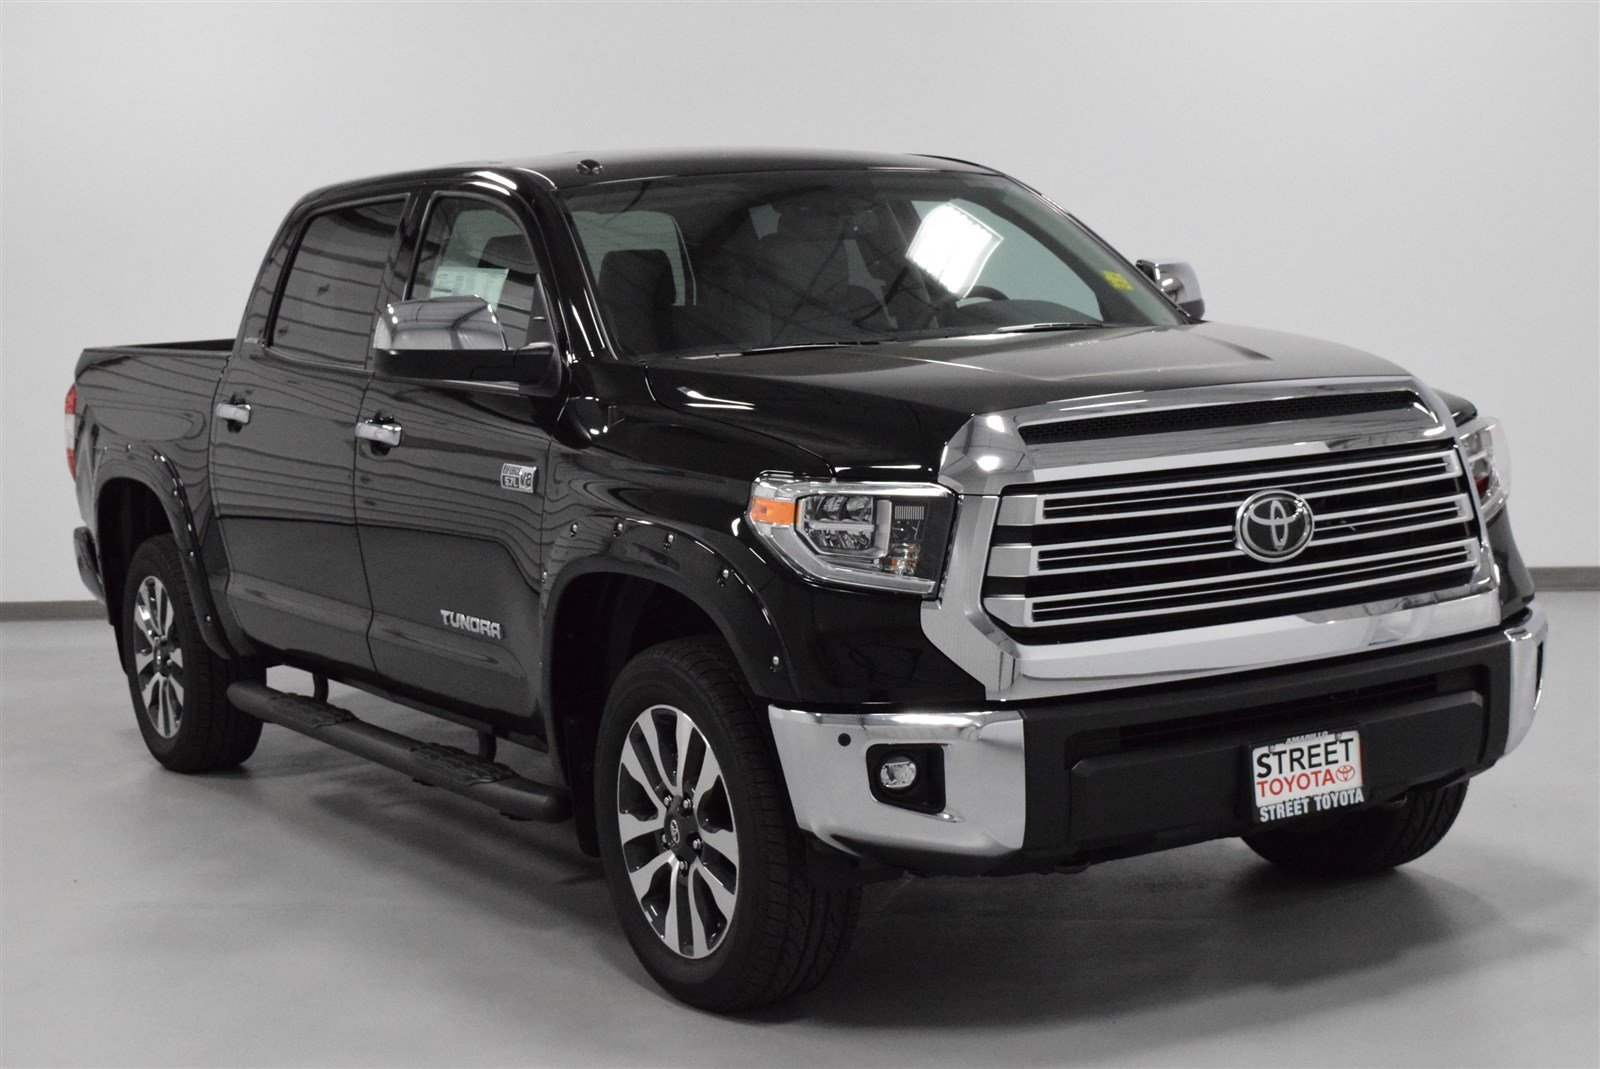 Research the New 2018 Toyota TUNDRA 4X4 for sale in Amarillo, TX. Learn